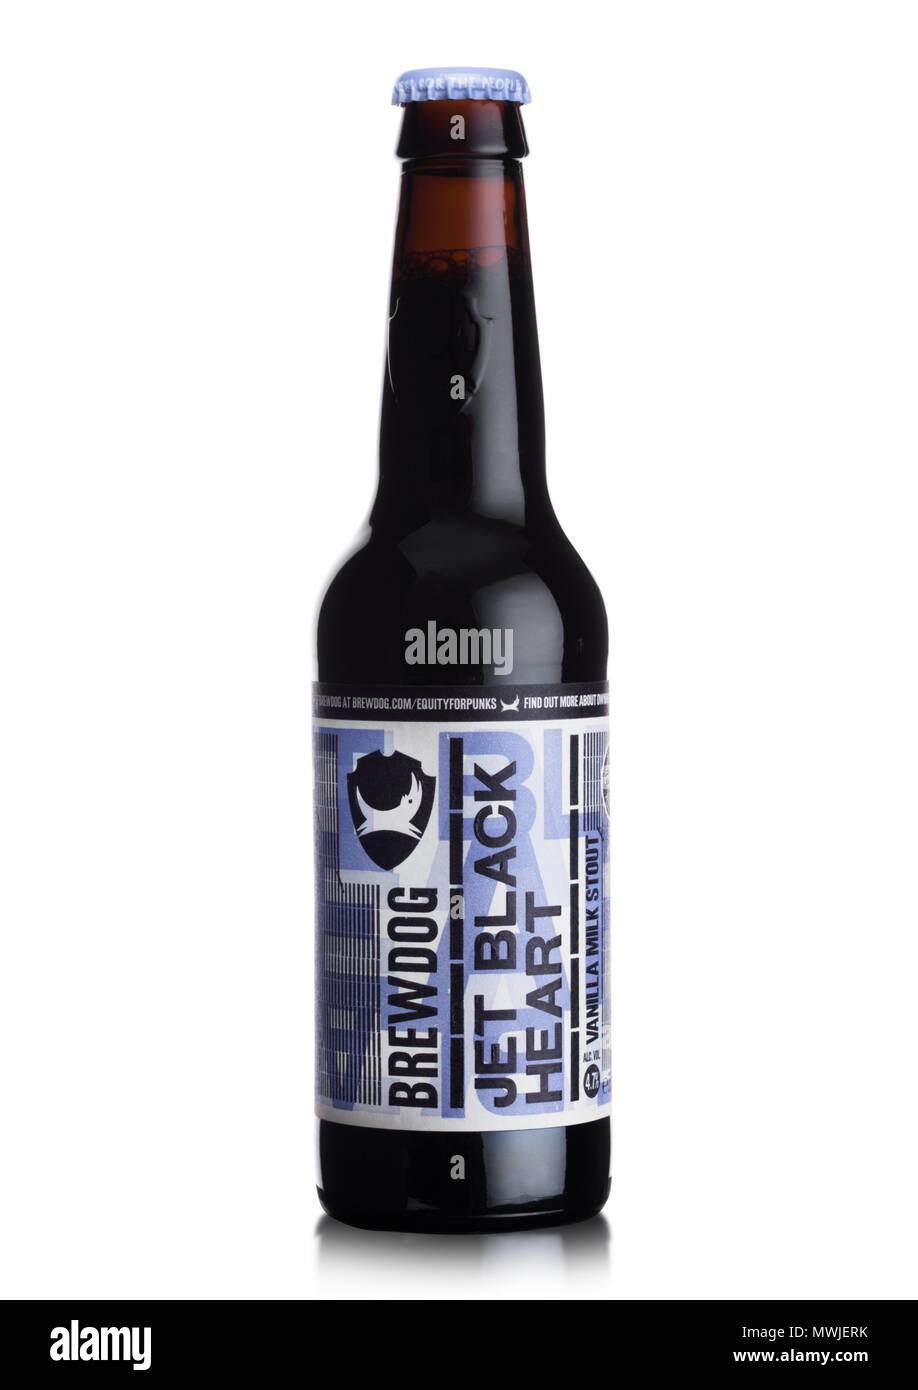 LONDON, UK - JUNE 01, 2018: Bottle of Jrt Black Heart stout beer, from the Brewdog brewery on white background. Stock Photo